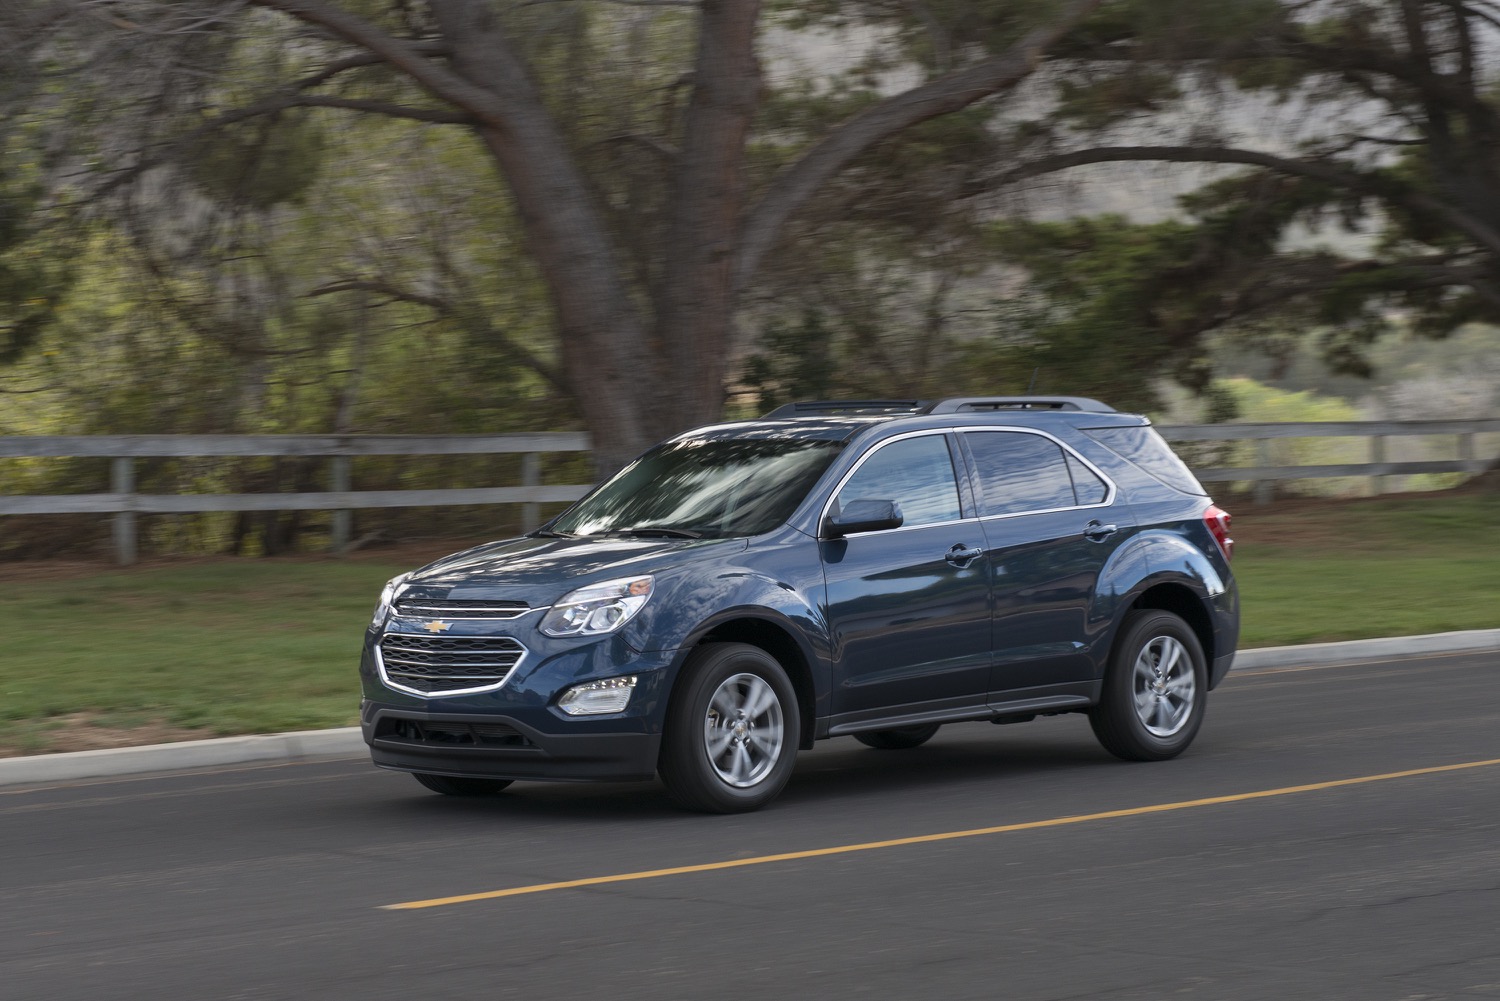 2017 Chevy Equinox Changes, Updates Detailed | GM Authority